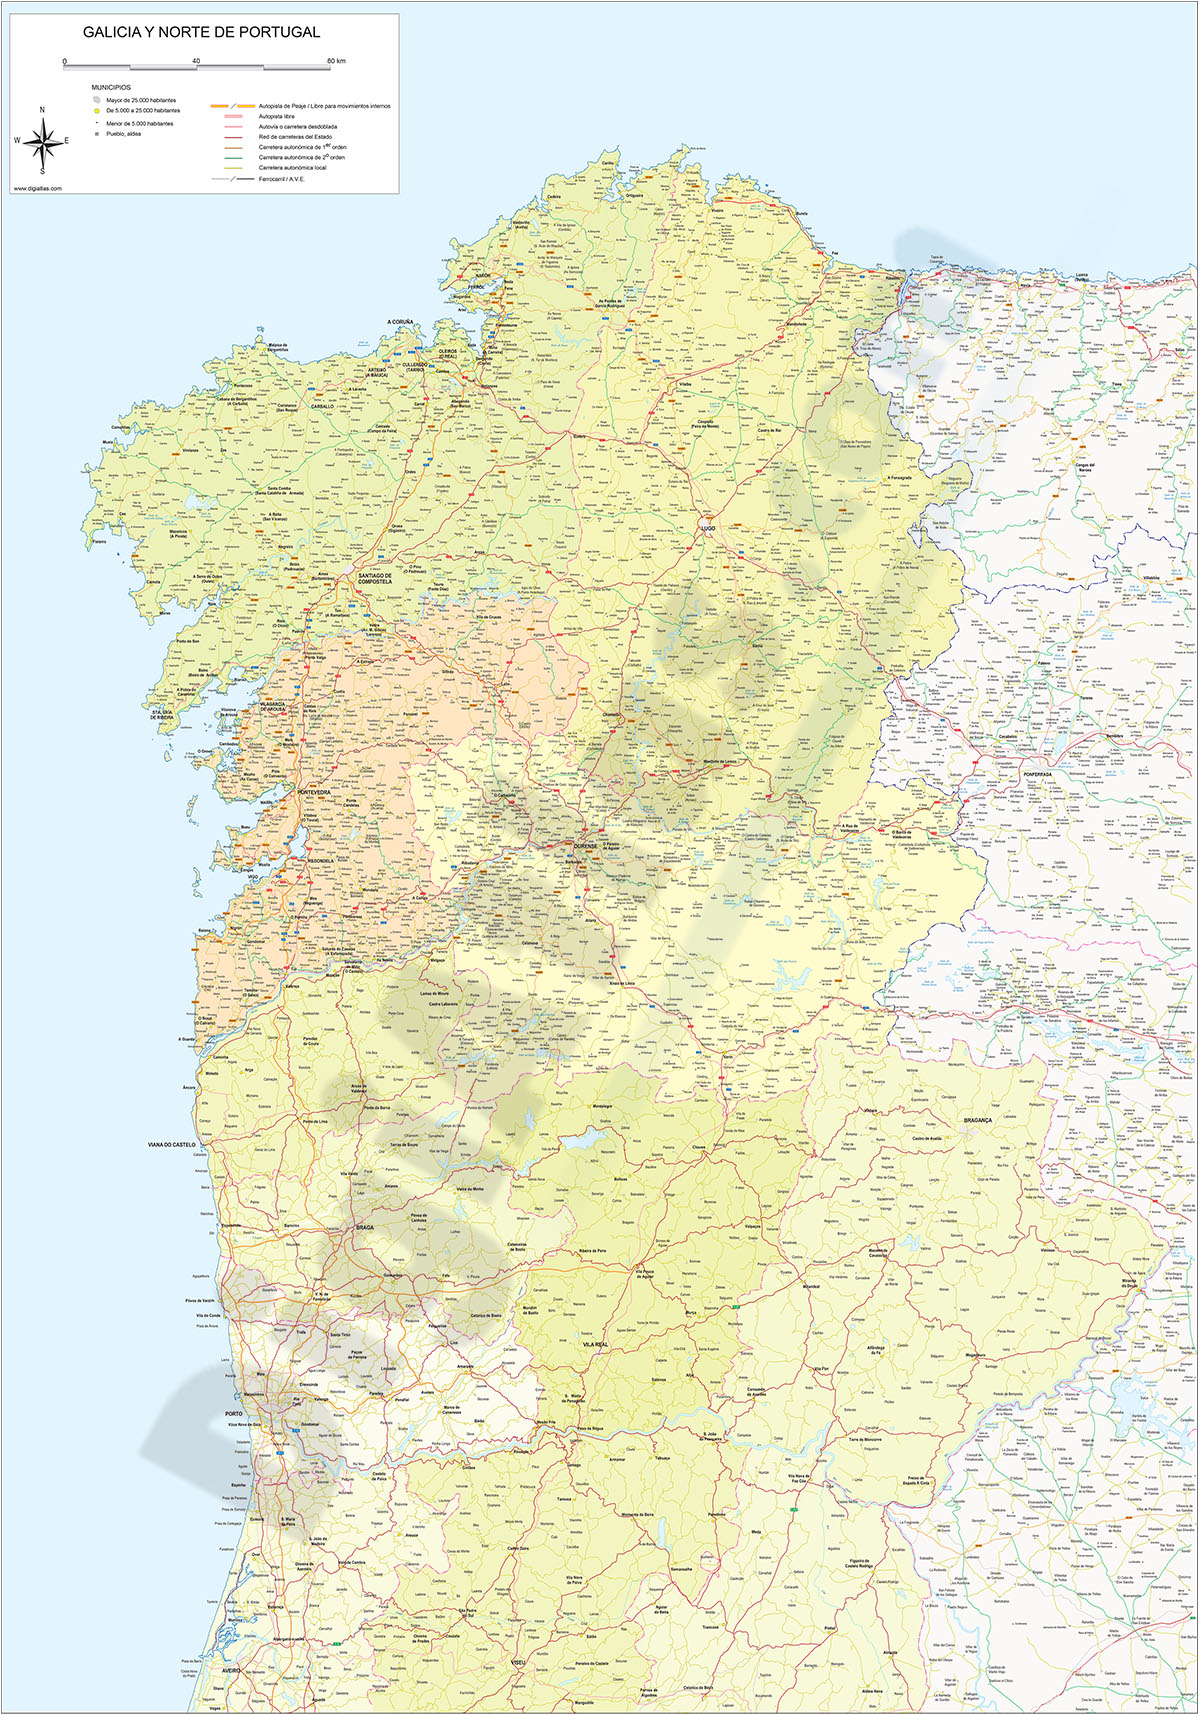 Map of Galicia and North Portugal